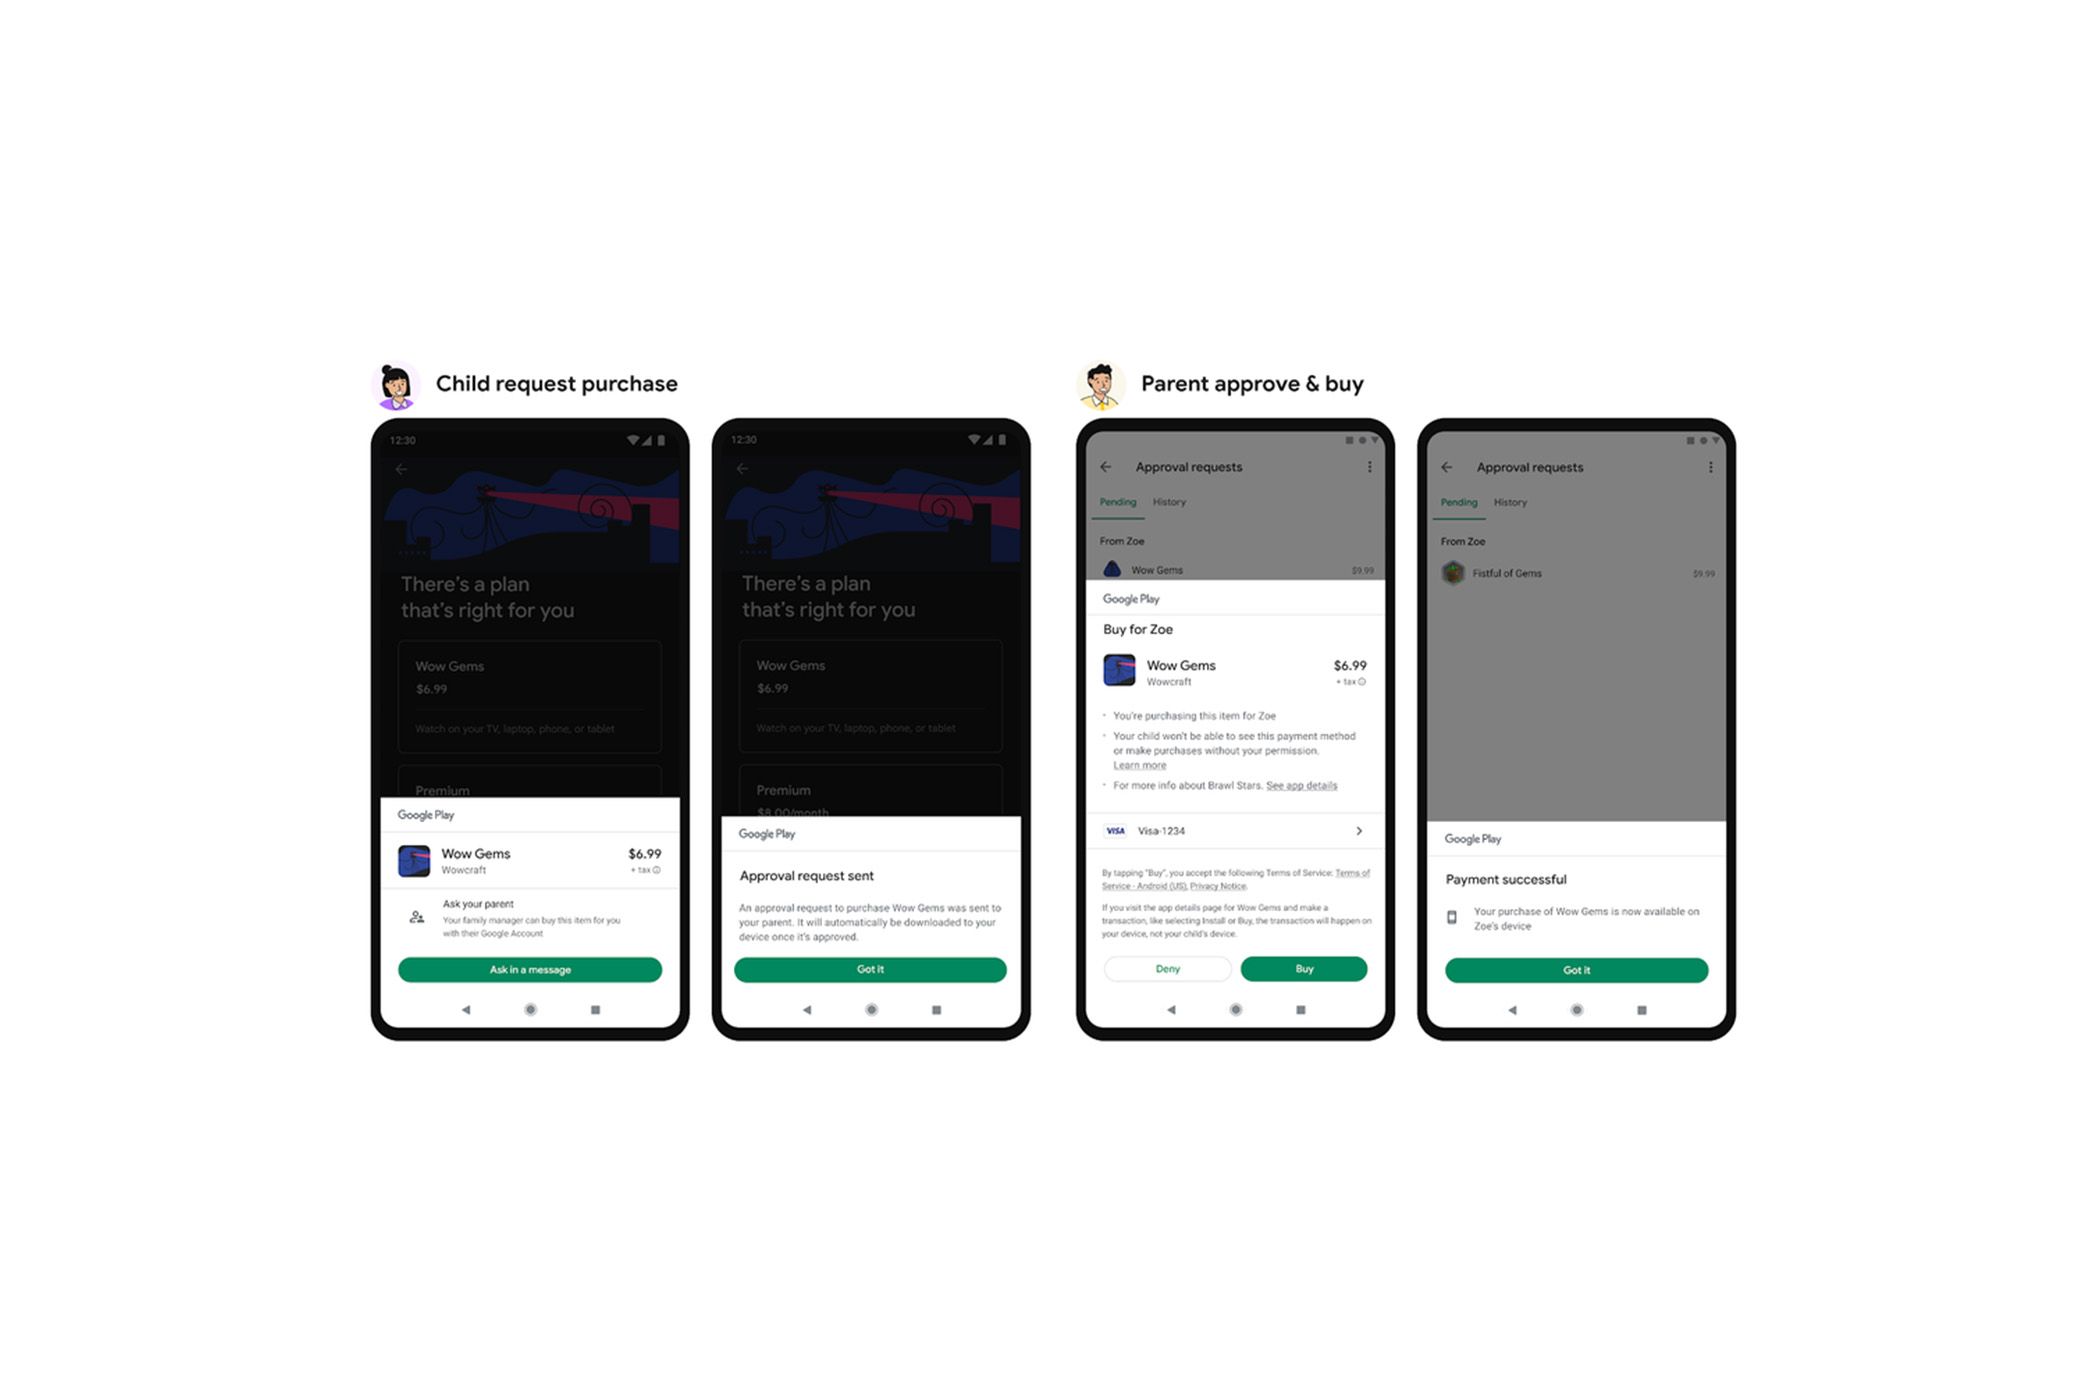 Screenshots showing the new Purchase Request feature on the Google Play Store on white background.